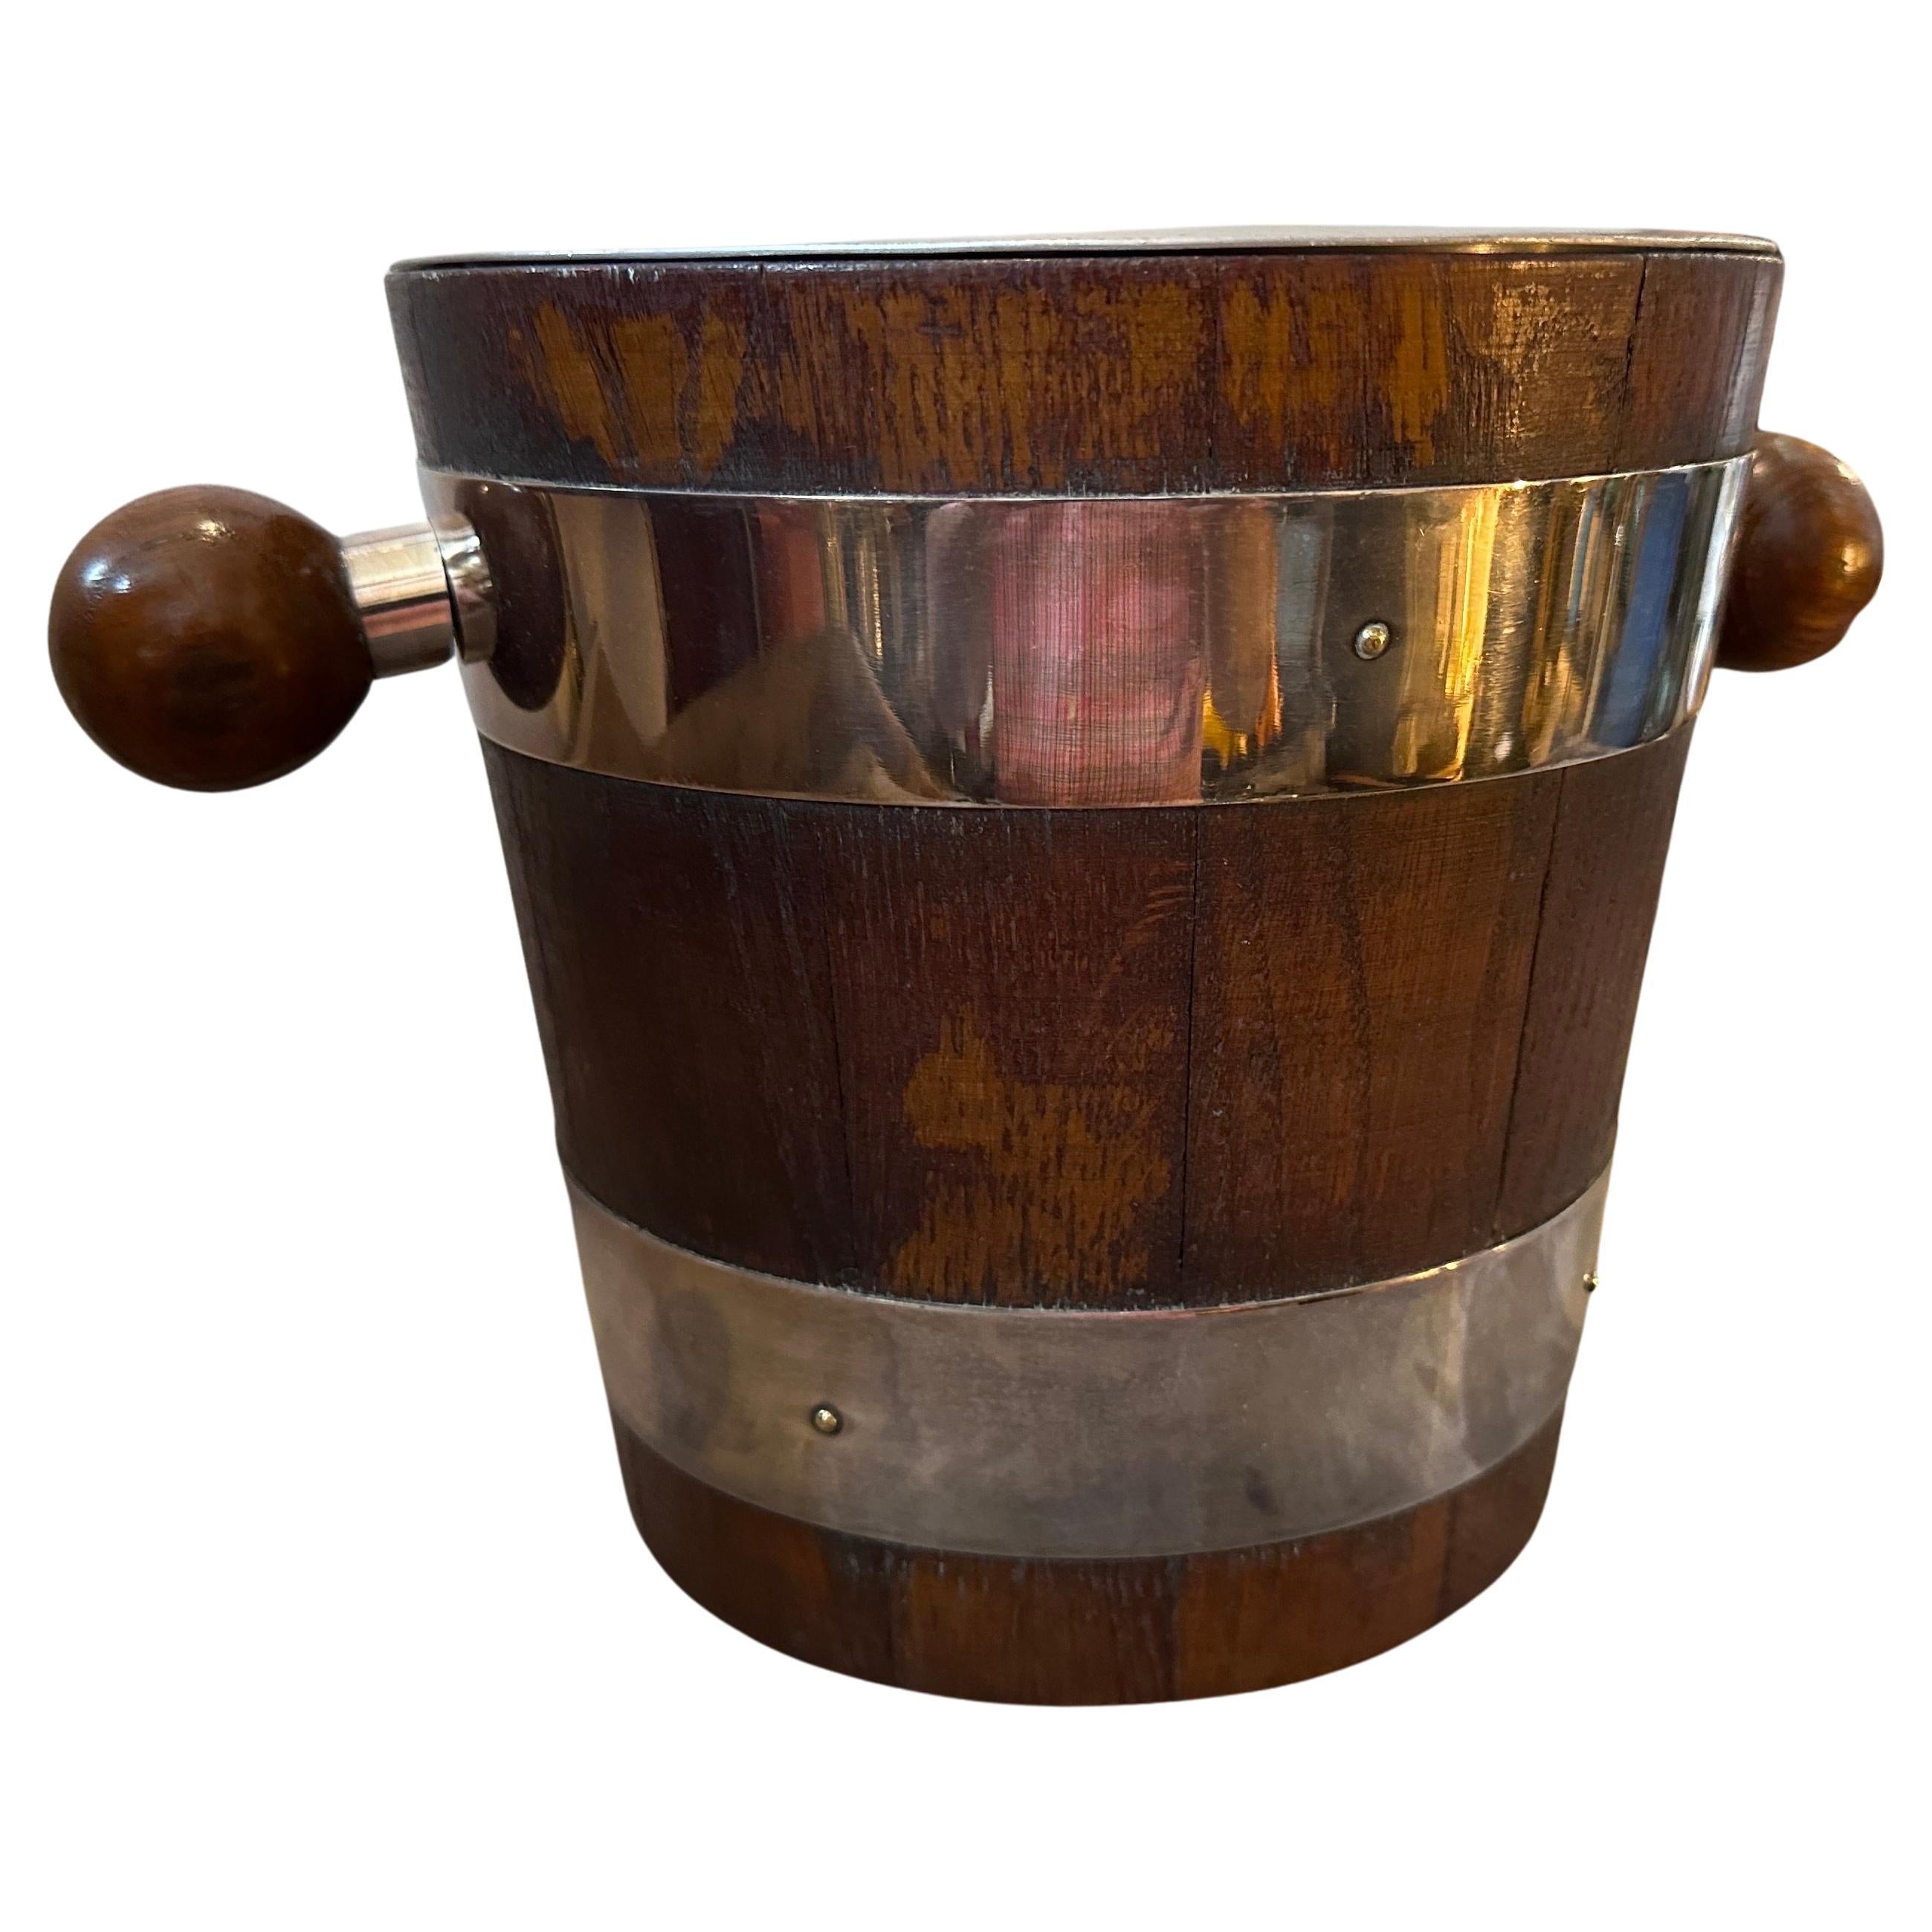 An amazing Art deco oak wood and silver plated metal wine cooler designed and manufactured in Sweden by Gab in original lovely conditions. It's all marked on a side Gab Nsalp. The Swedish Wine Cooler is a luxurious and stylish piece that embodies